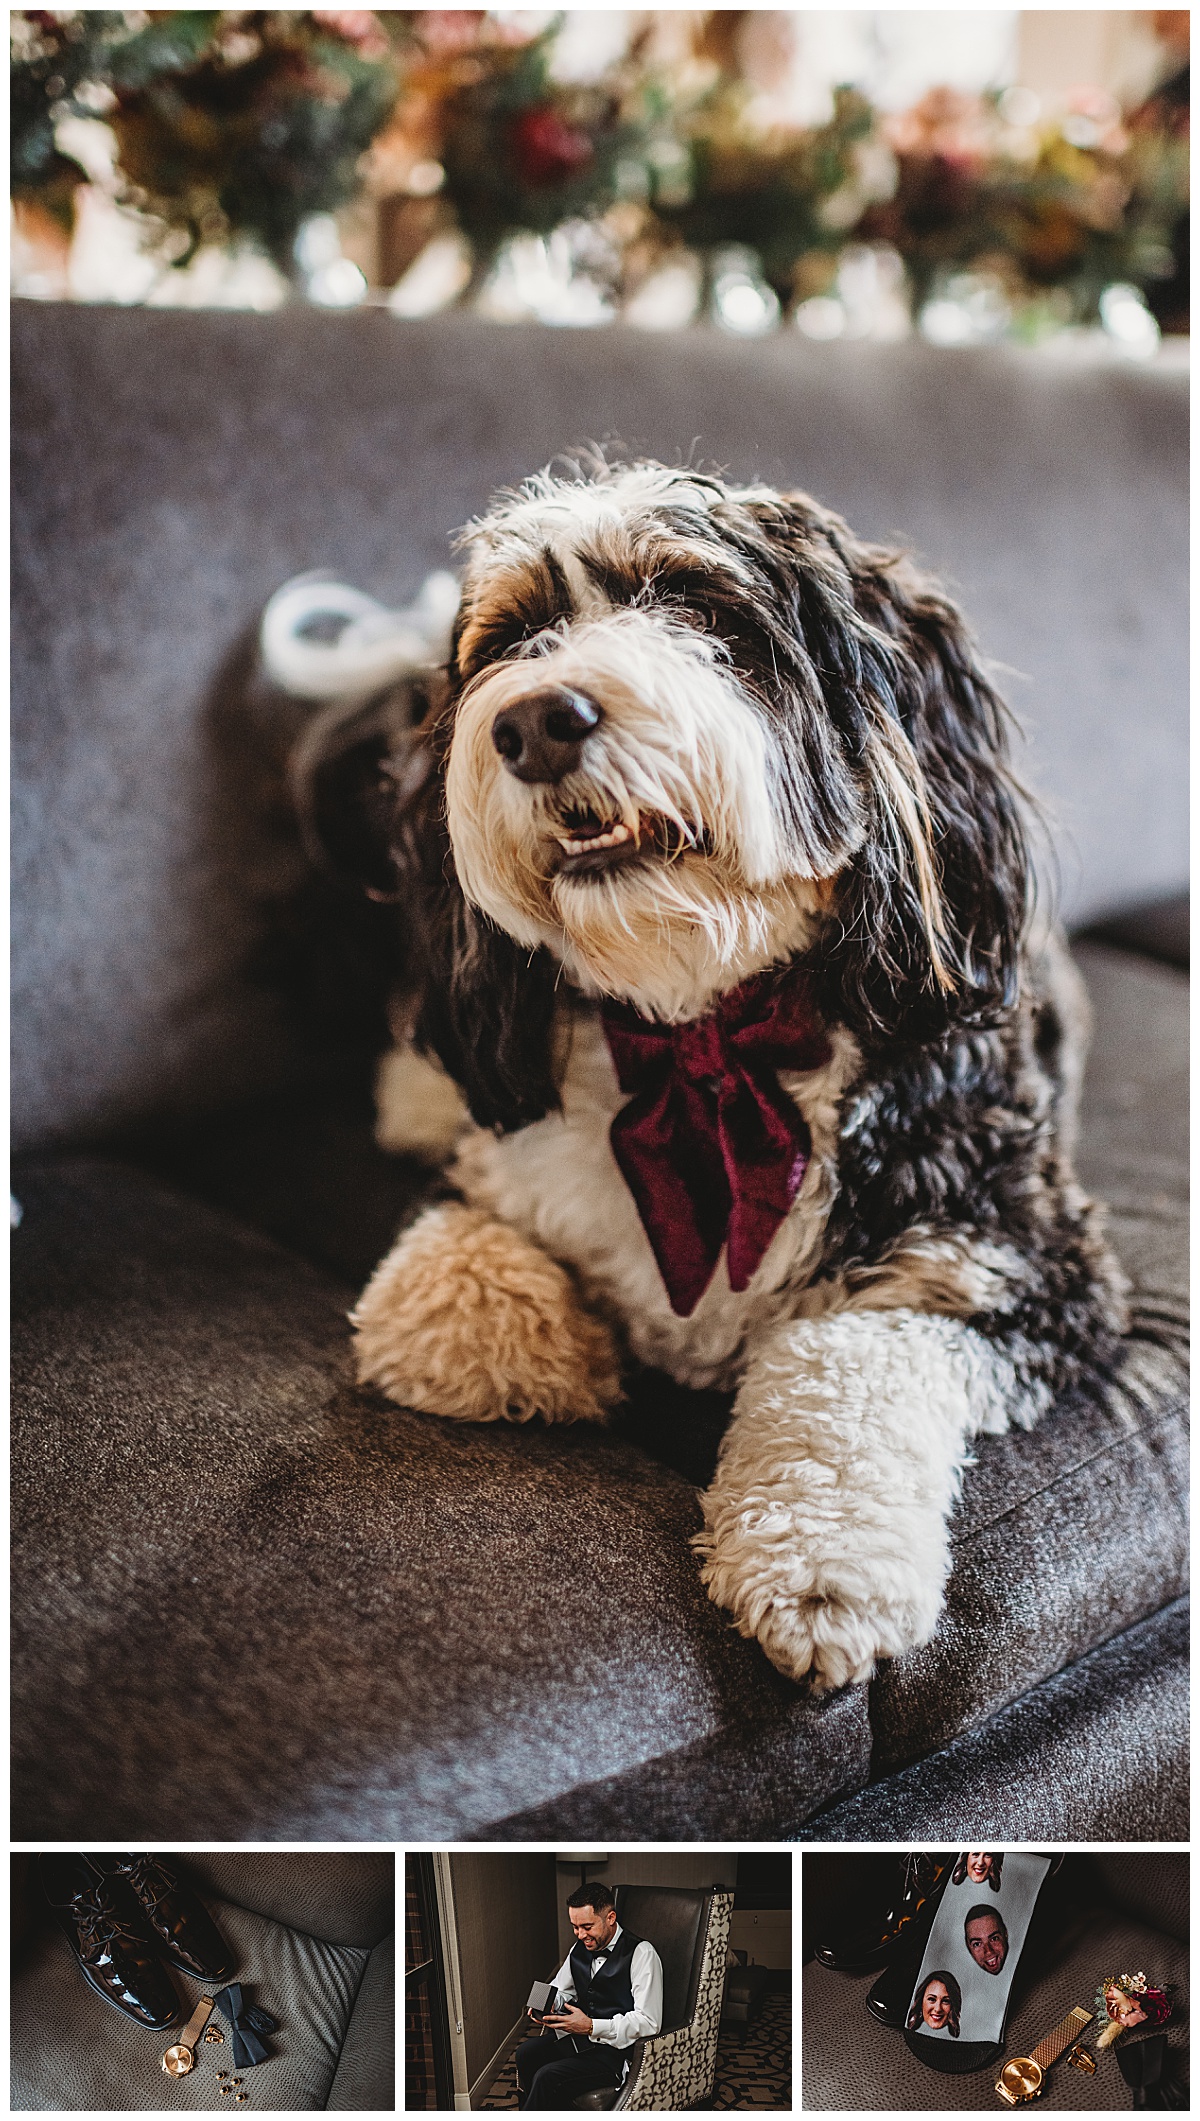 Getting ready photos with dog for a moody winter wedding in Baltimore by Brittany Dunbar Photography, a Baltimore Wedding Photographer.